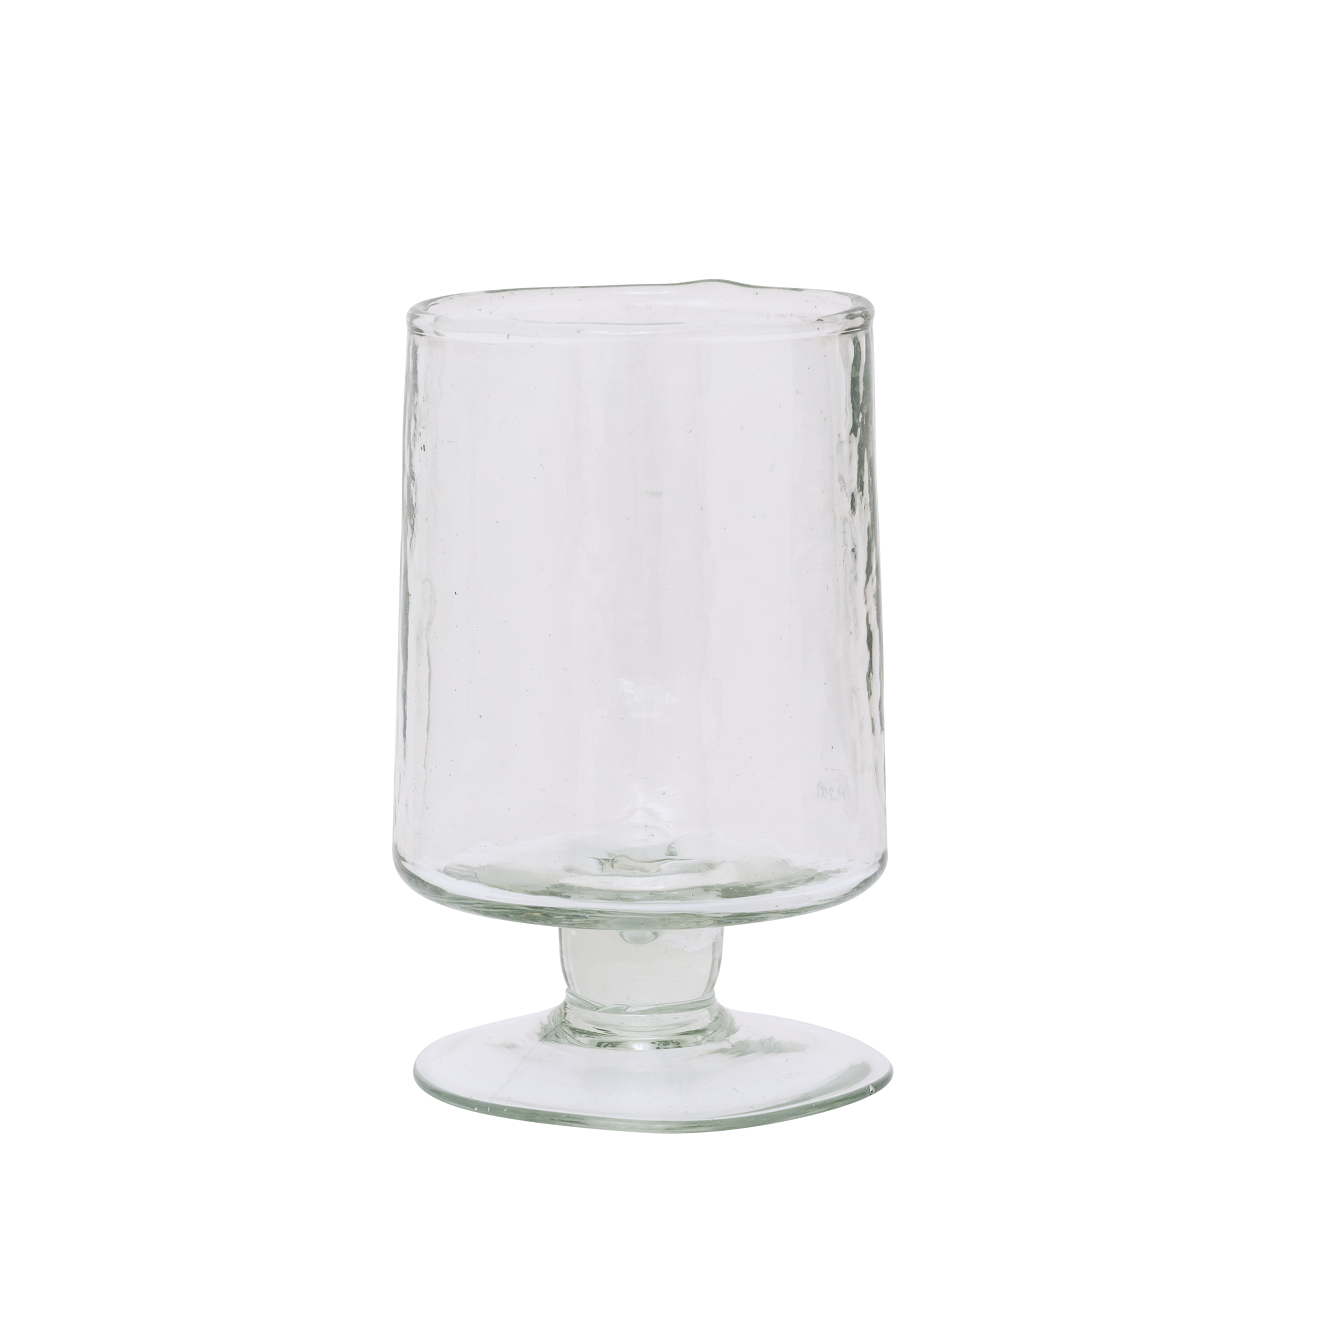 Unc Wine Glass Hammered Transparent Gift